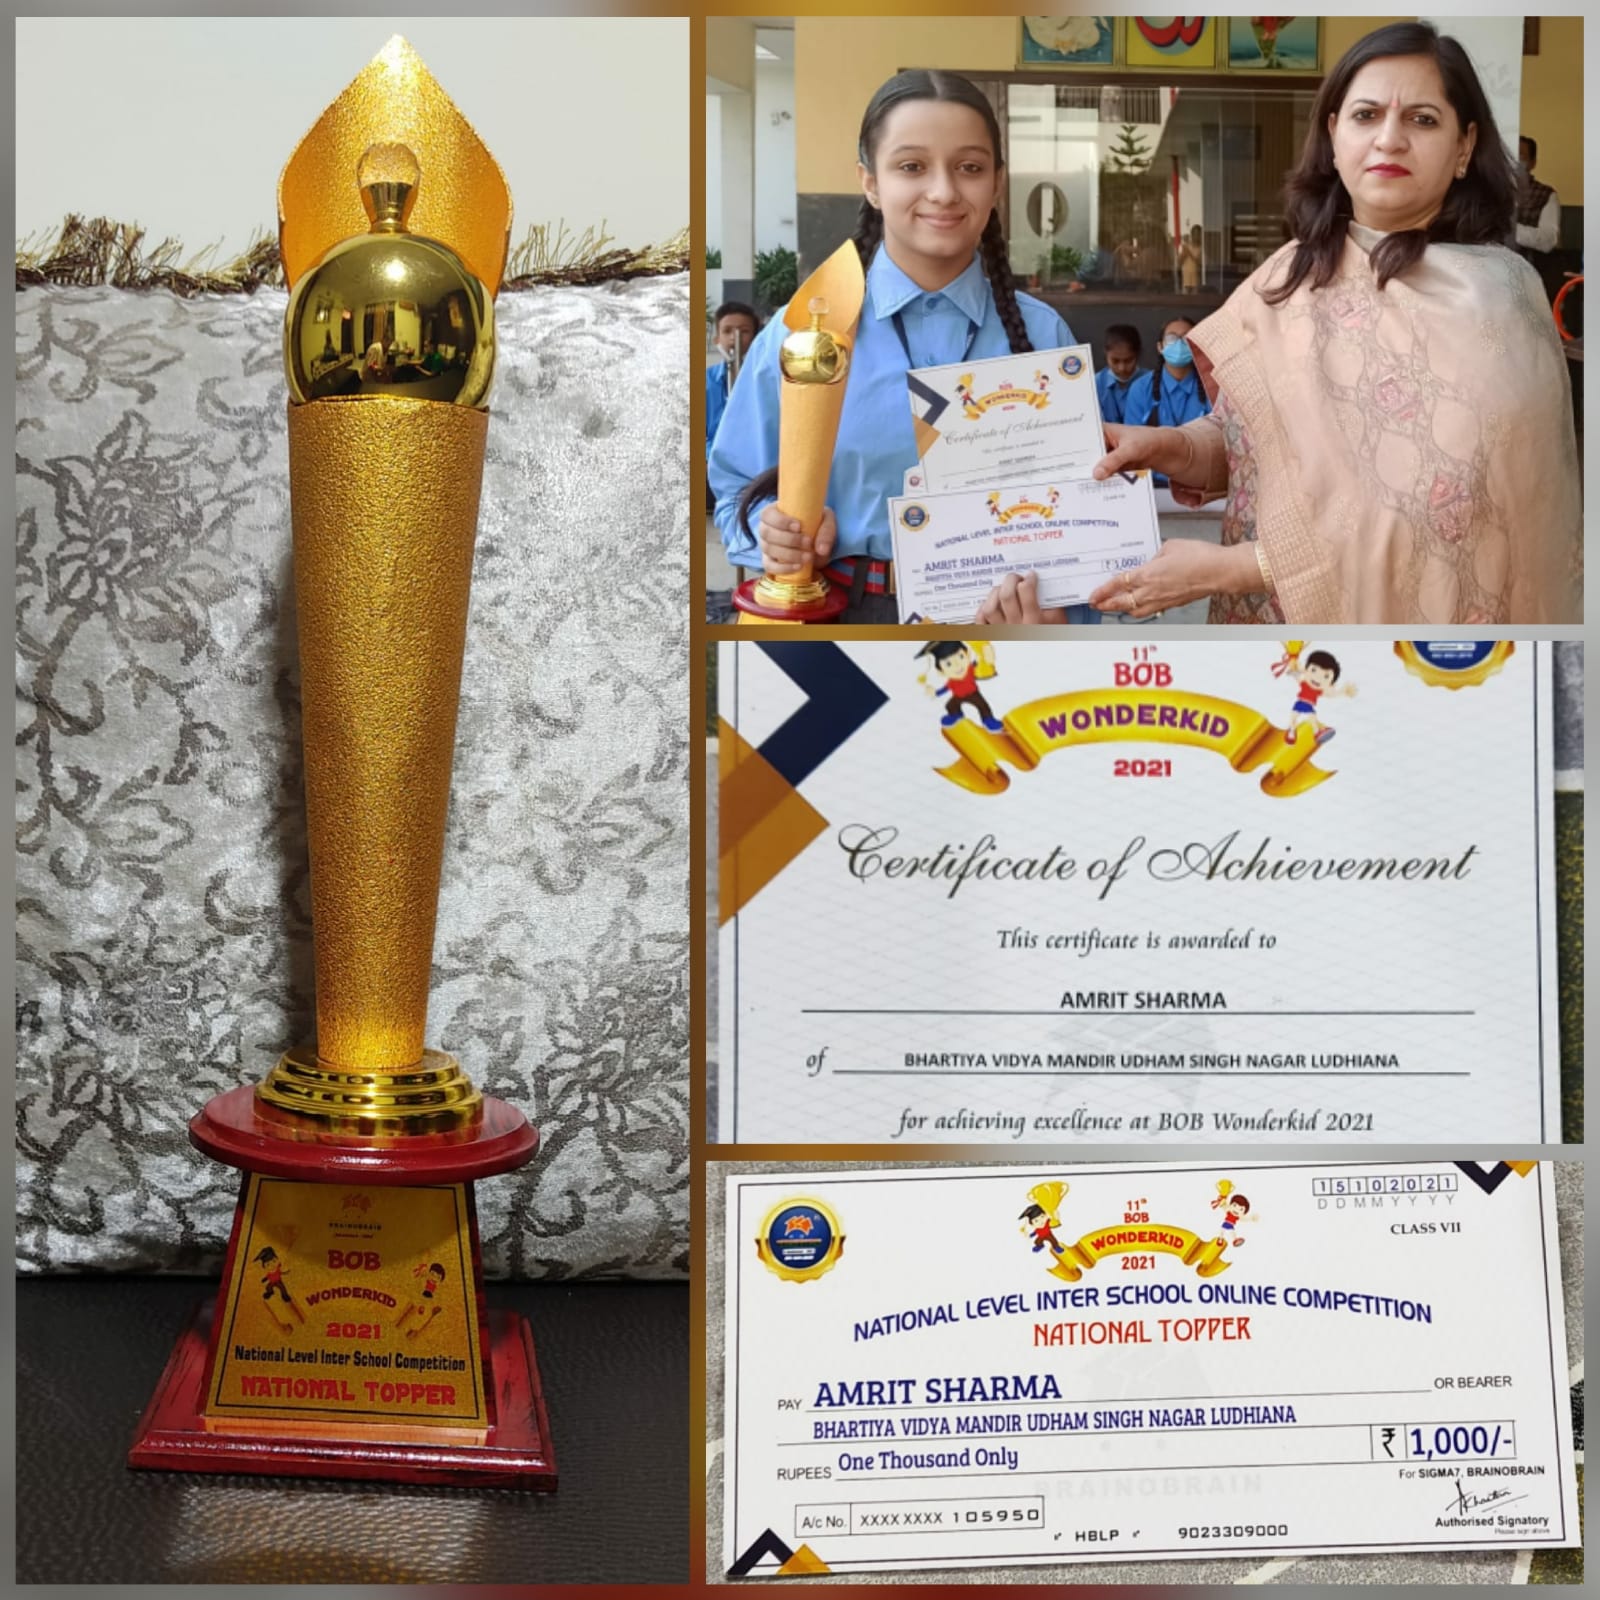 Bvmite got recognition as National  Topper in online National Level Inter School Competition